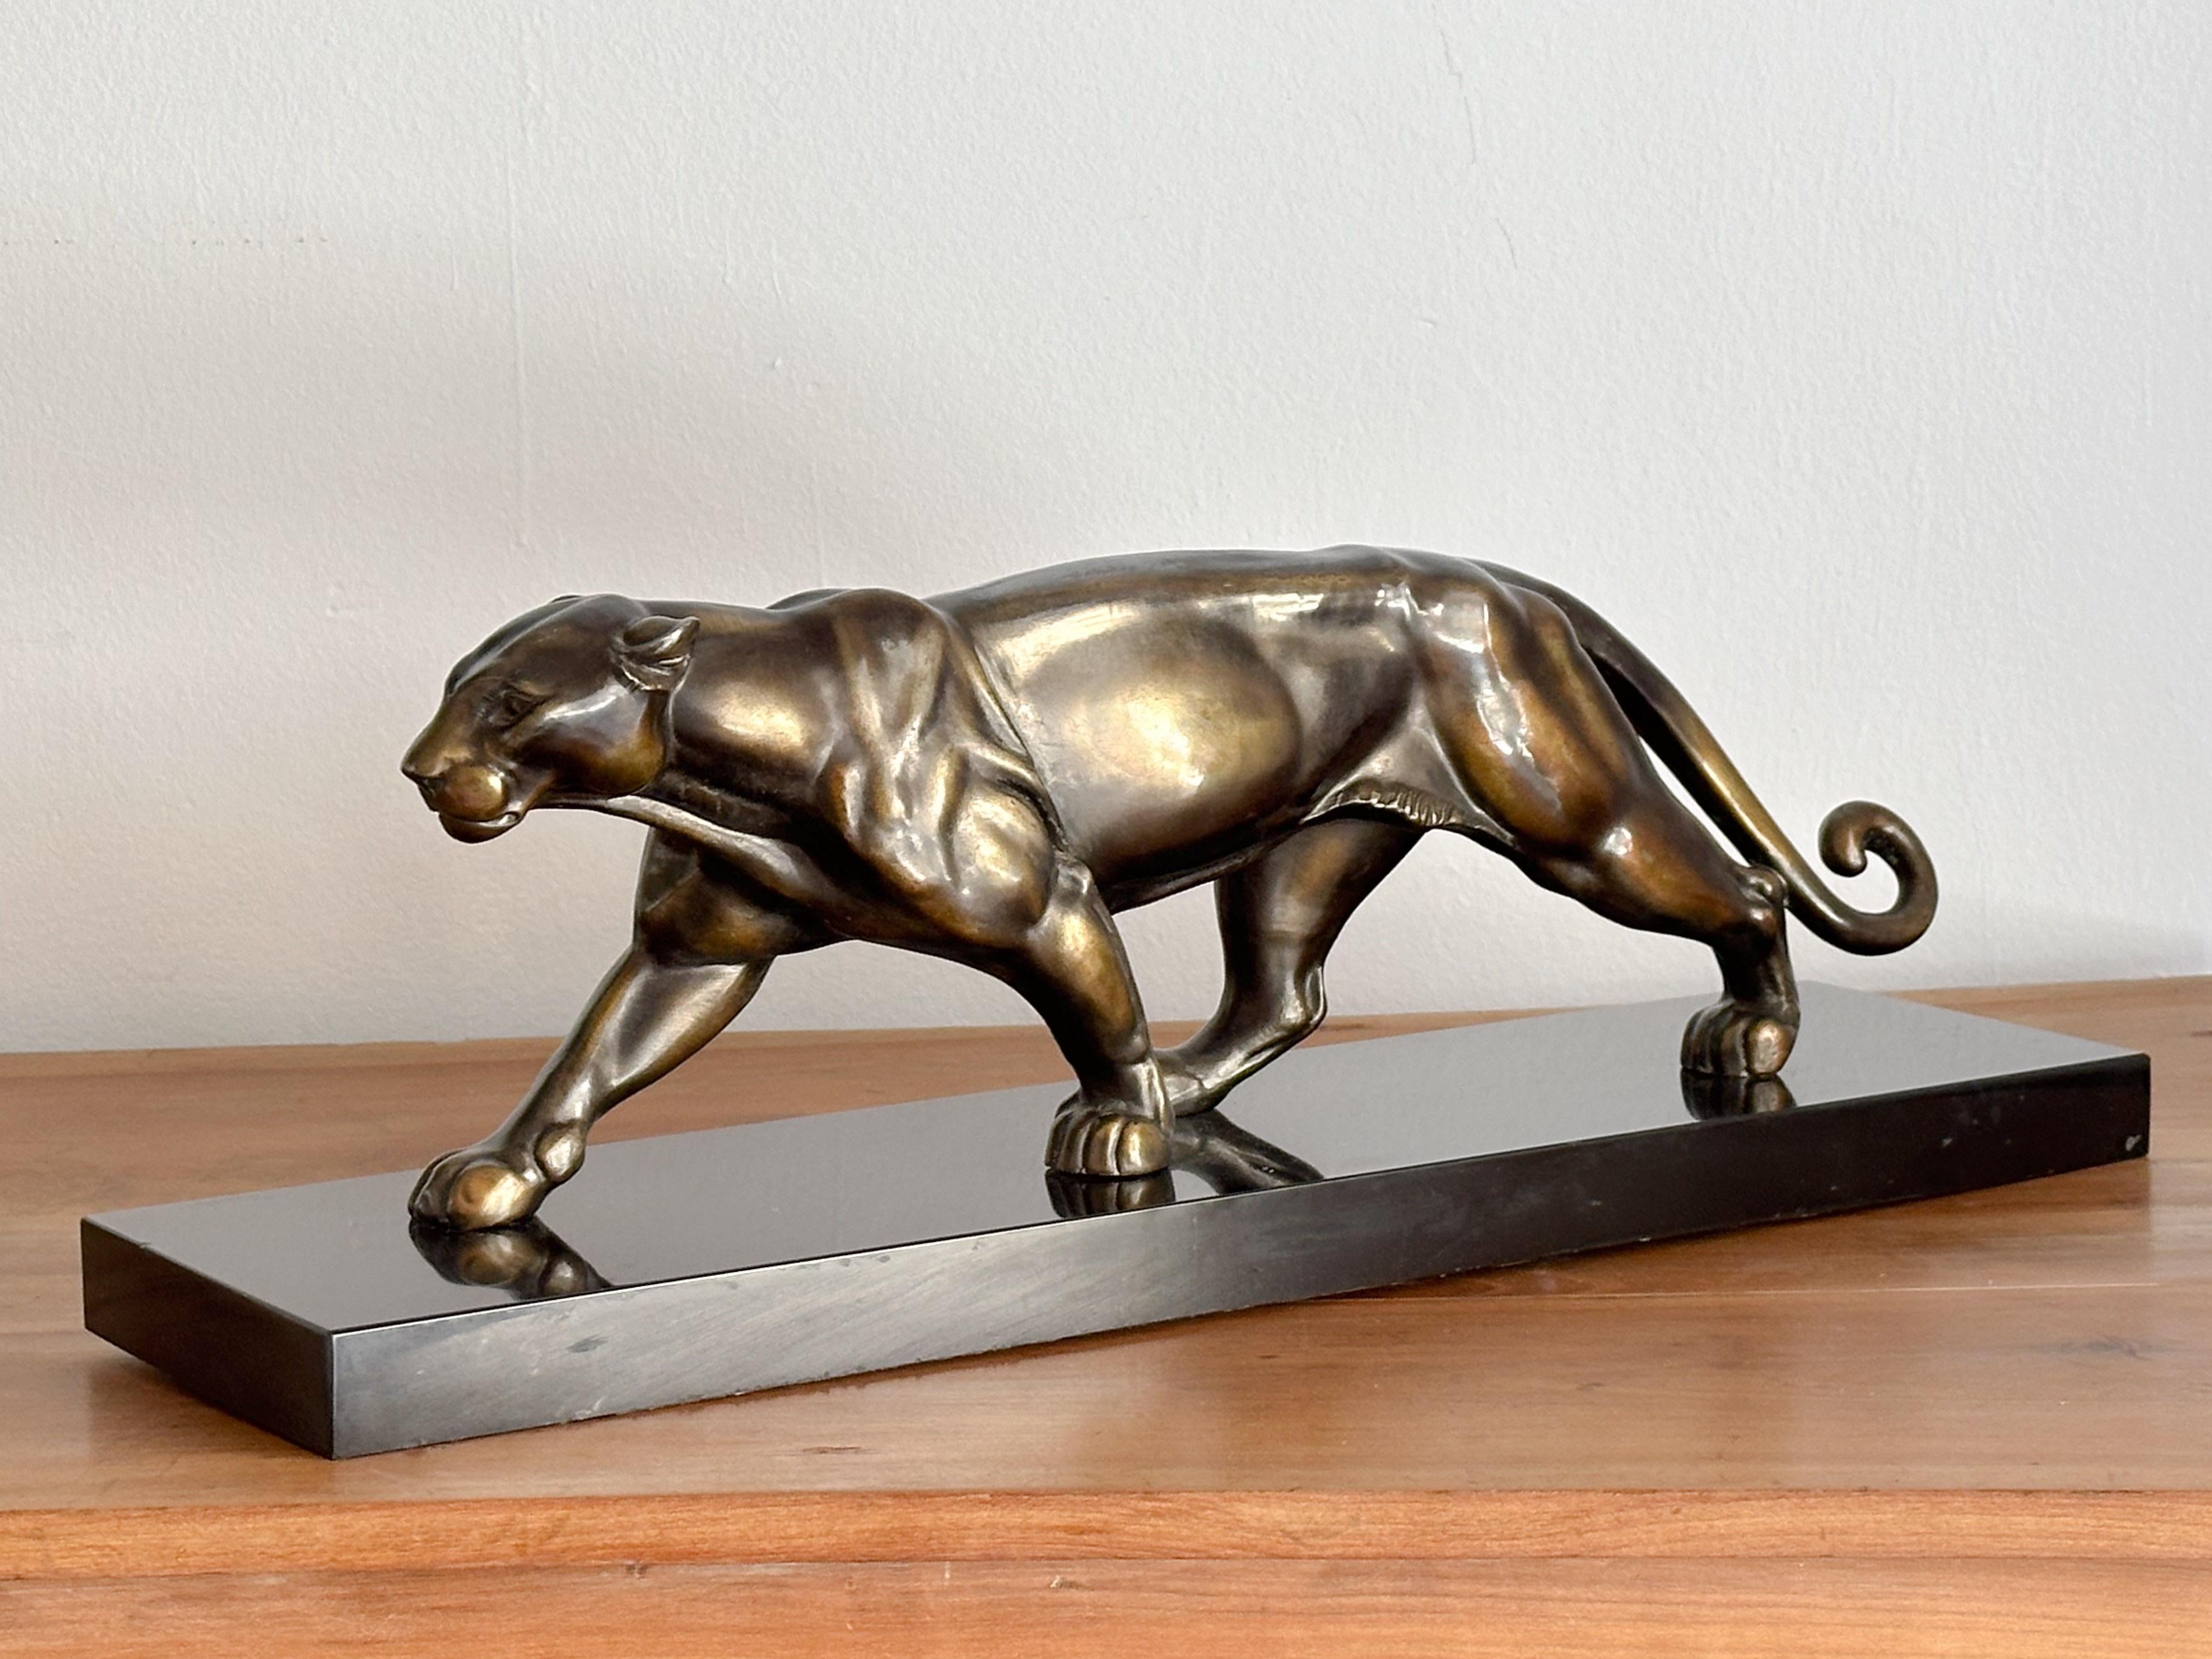 Art deco panther sculpture in patinated metal based on a plate of Belgian marble. 
Made in France Ca, 1930. Signed by Online (Alexandre Online)

It is in good condition, with wear on the patina and some small chips on the plate.